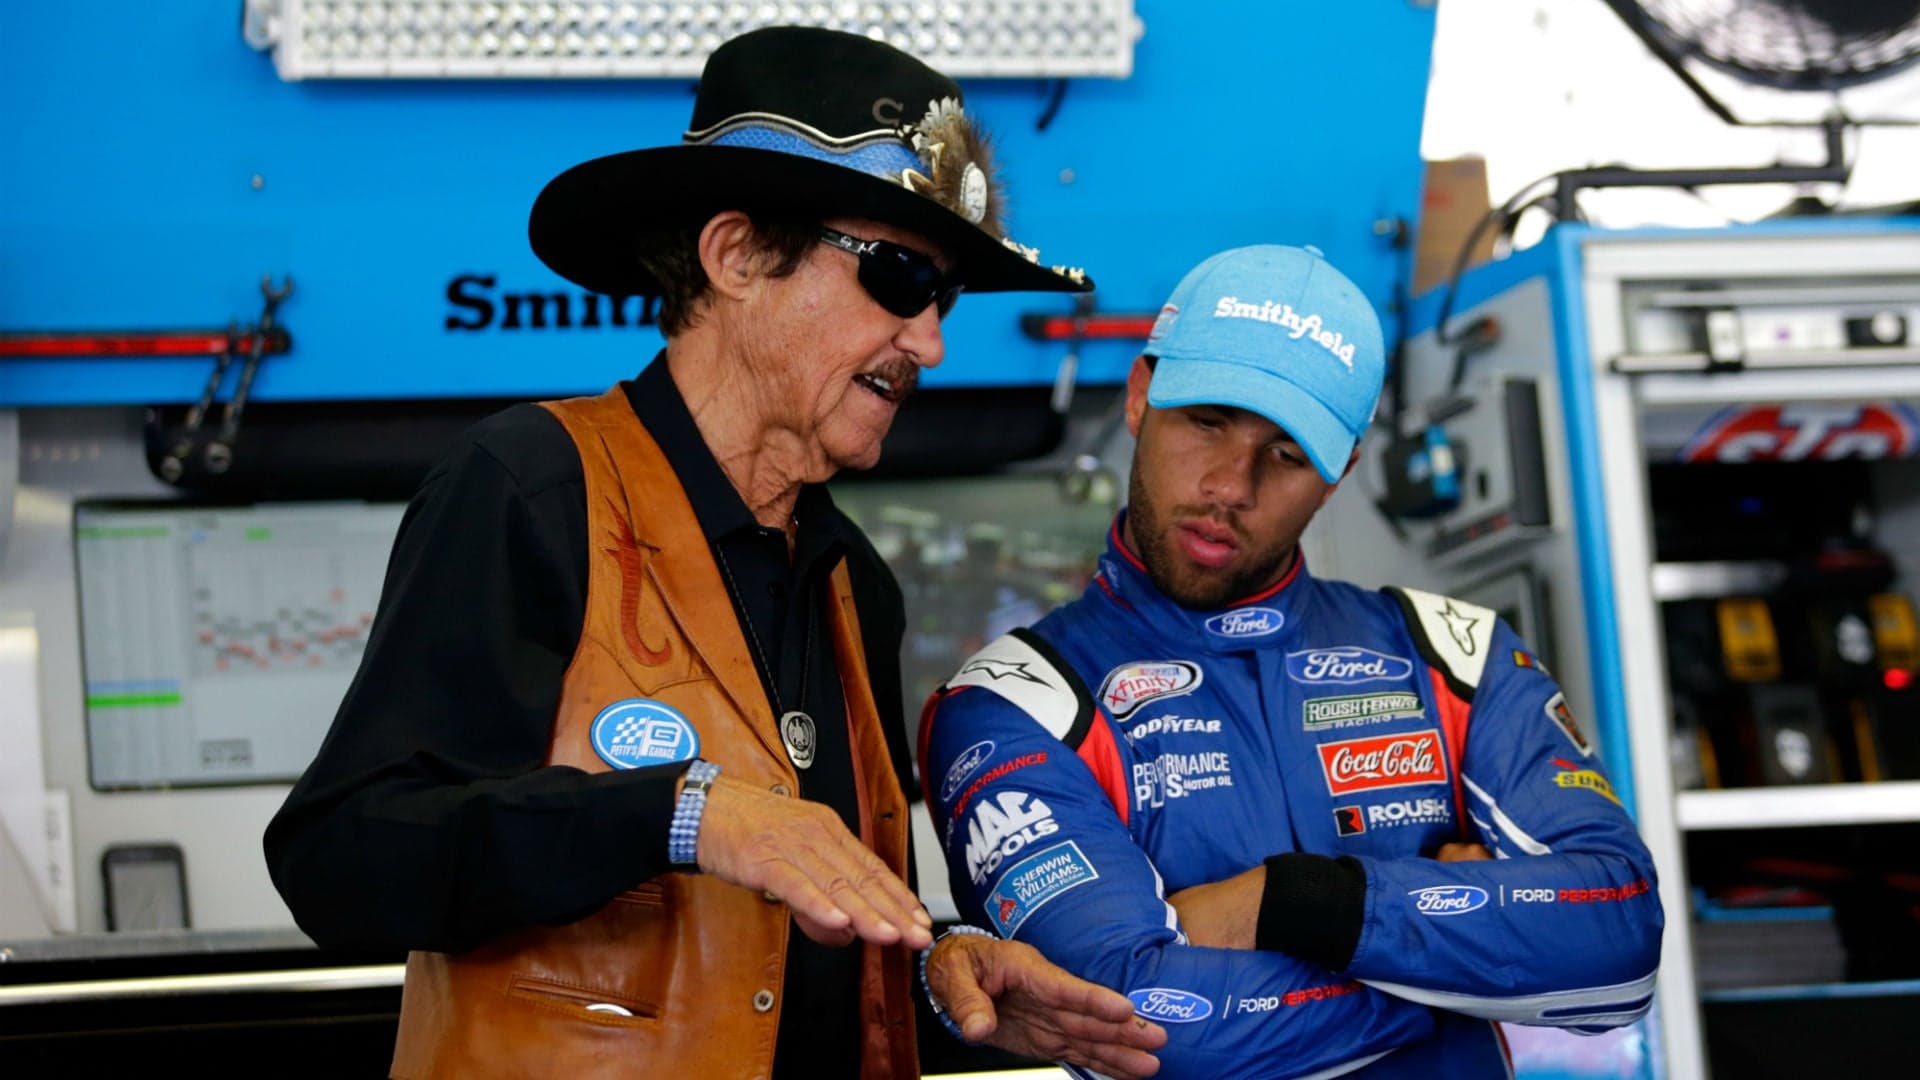 Darrell Wallace Jr. to Become First Black Driver to Race Full-Time in NASCAR’s Top Series Since 1971